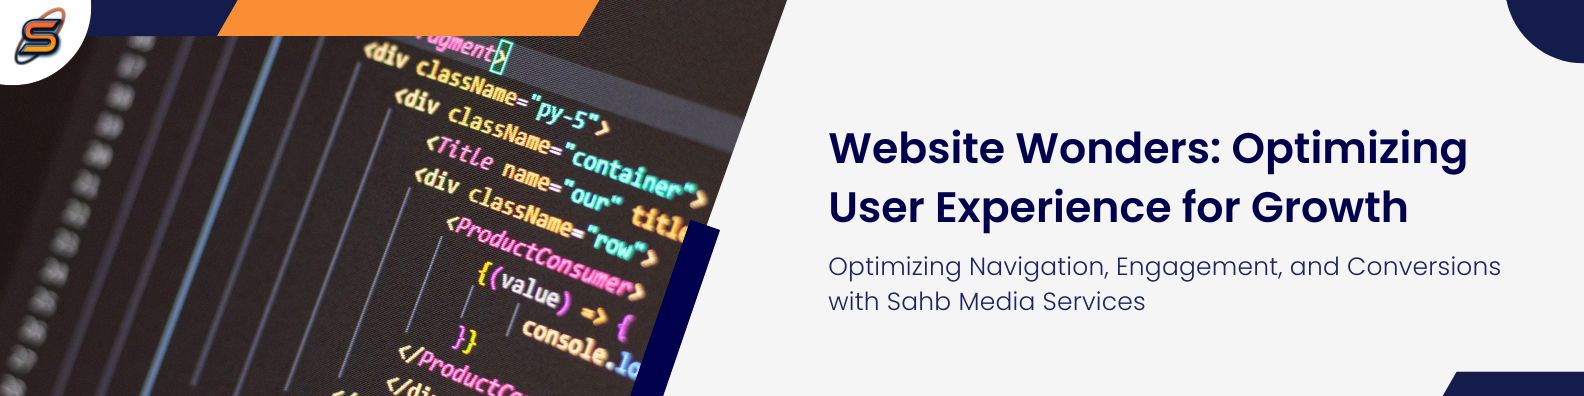 Website Wonders: Optimizing User Experience for Growth